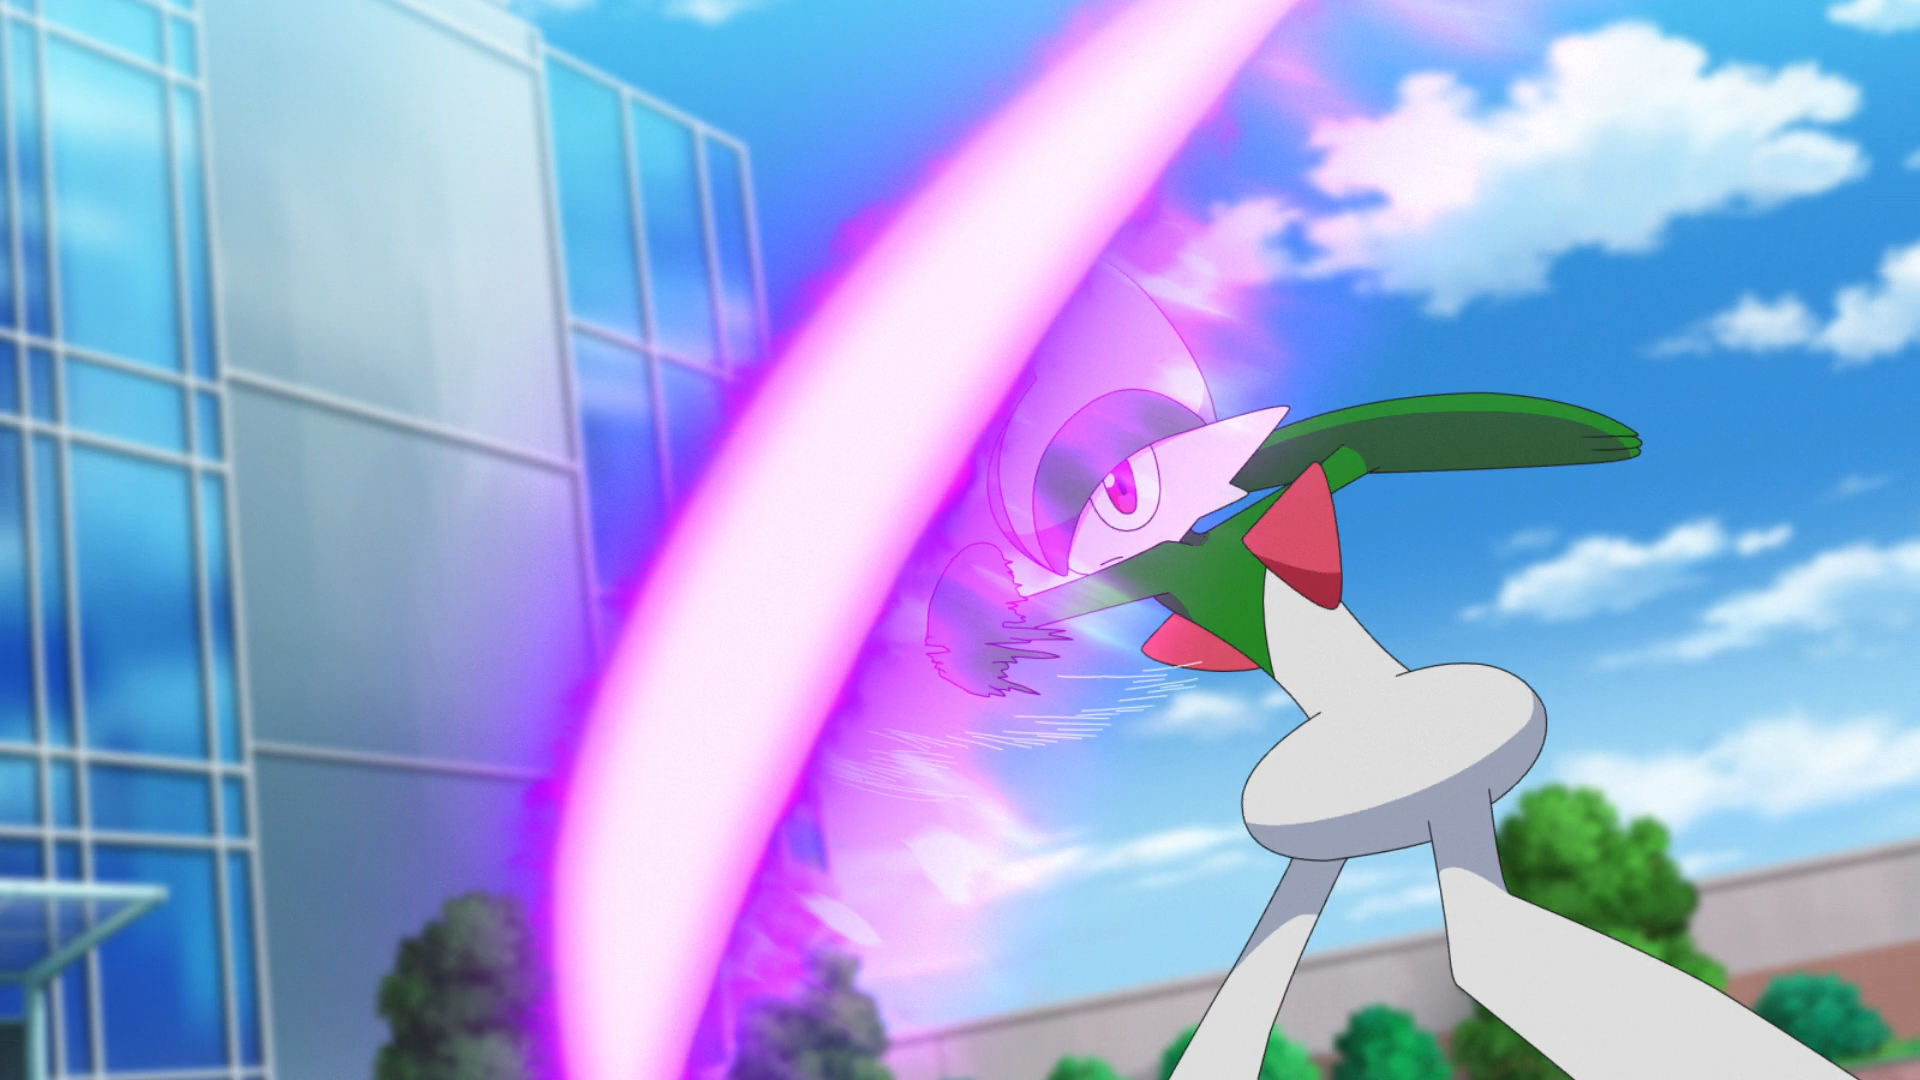 Rinto and his Gallade by WillDinoMaster55 on DeviantArt